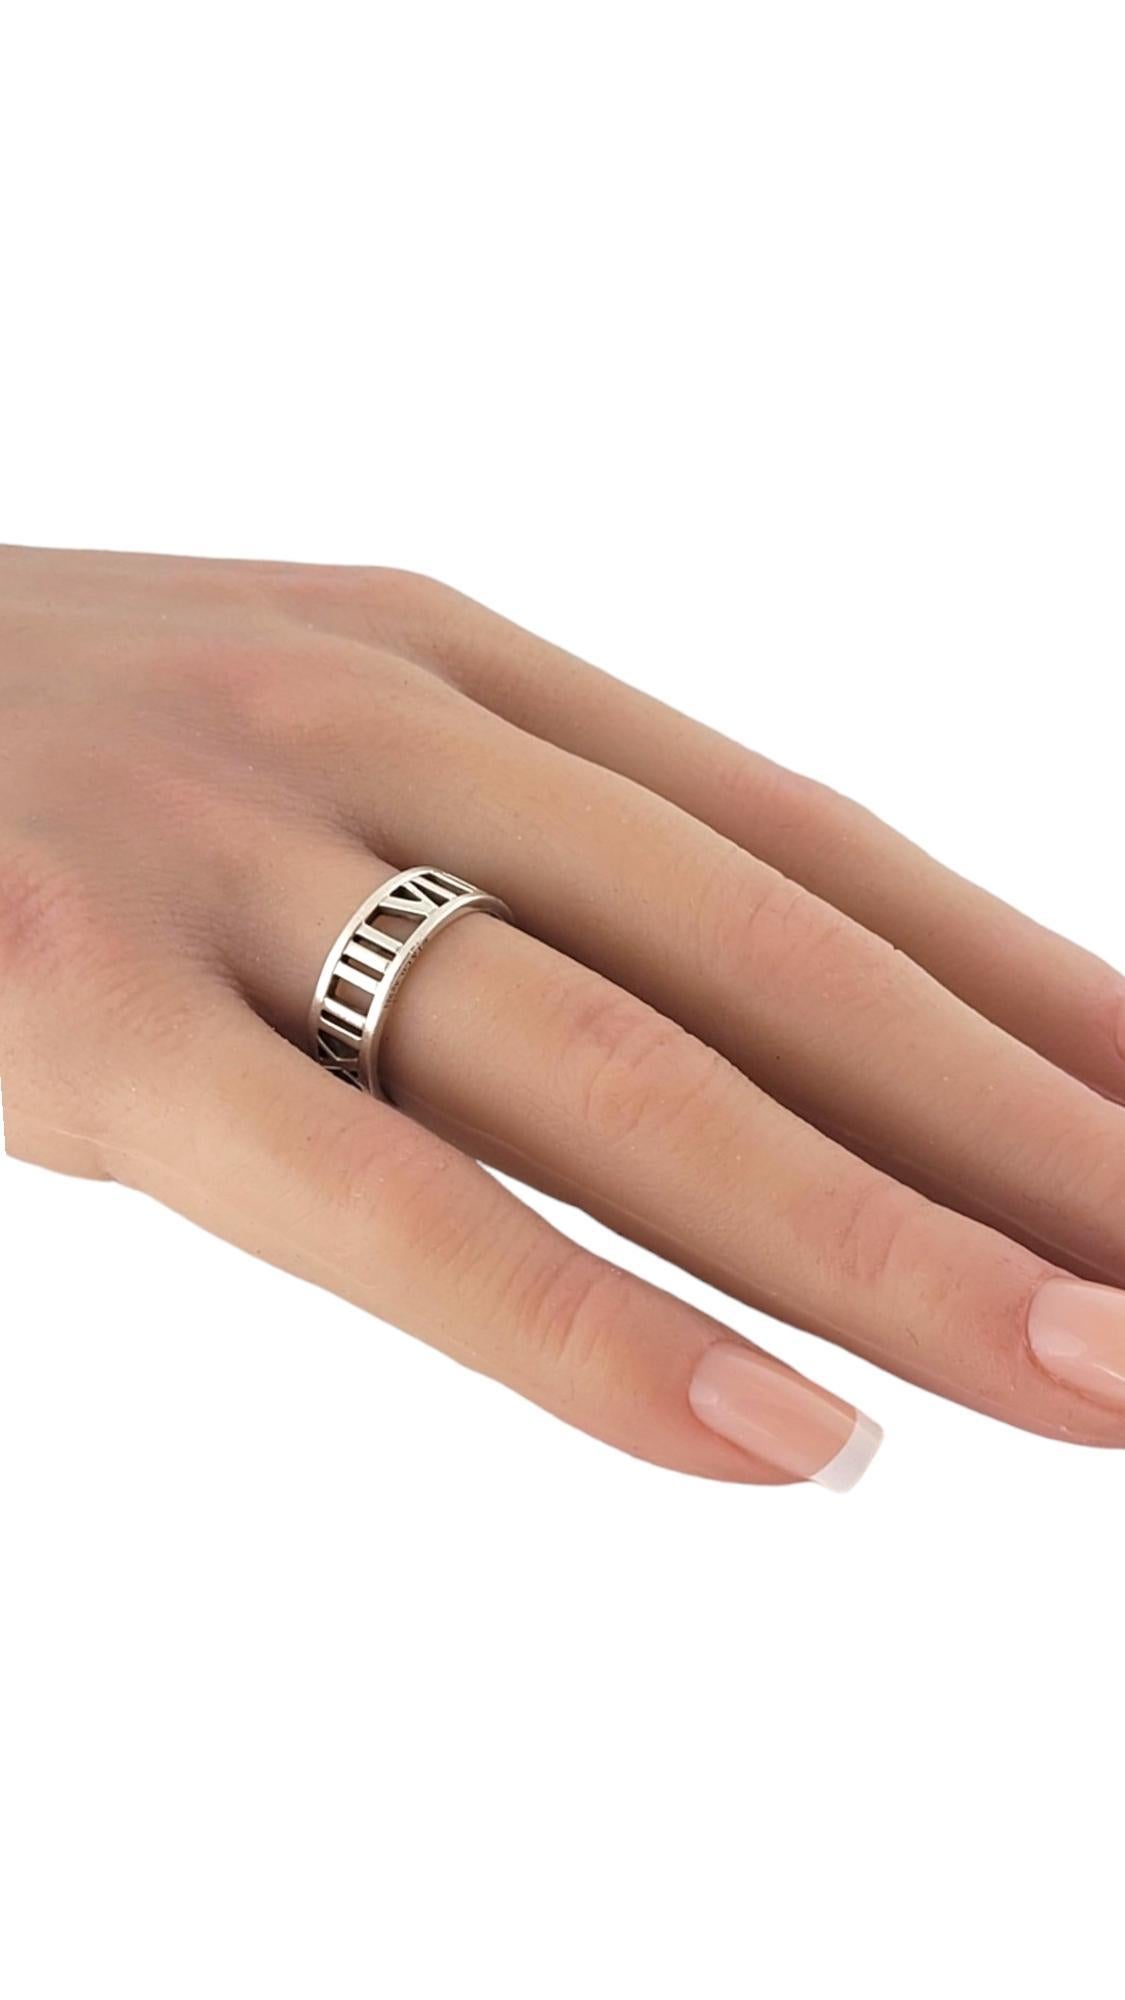 Tiffany & Co Sterling Silver Open Roman Numeral Band Ring Size 7.25-7.5 #17485 For Sale 3